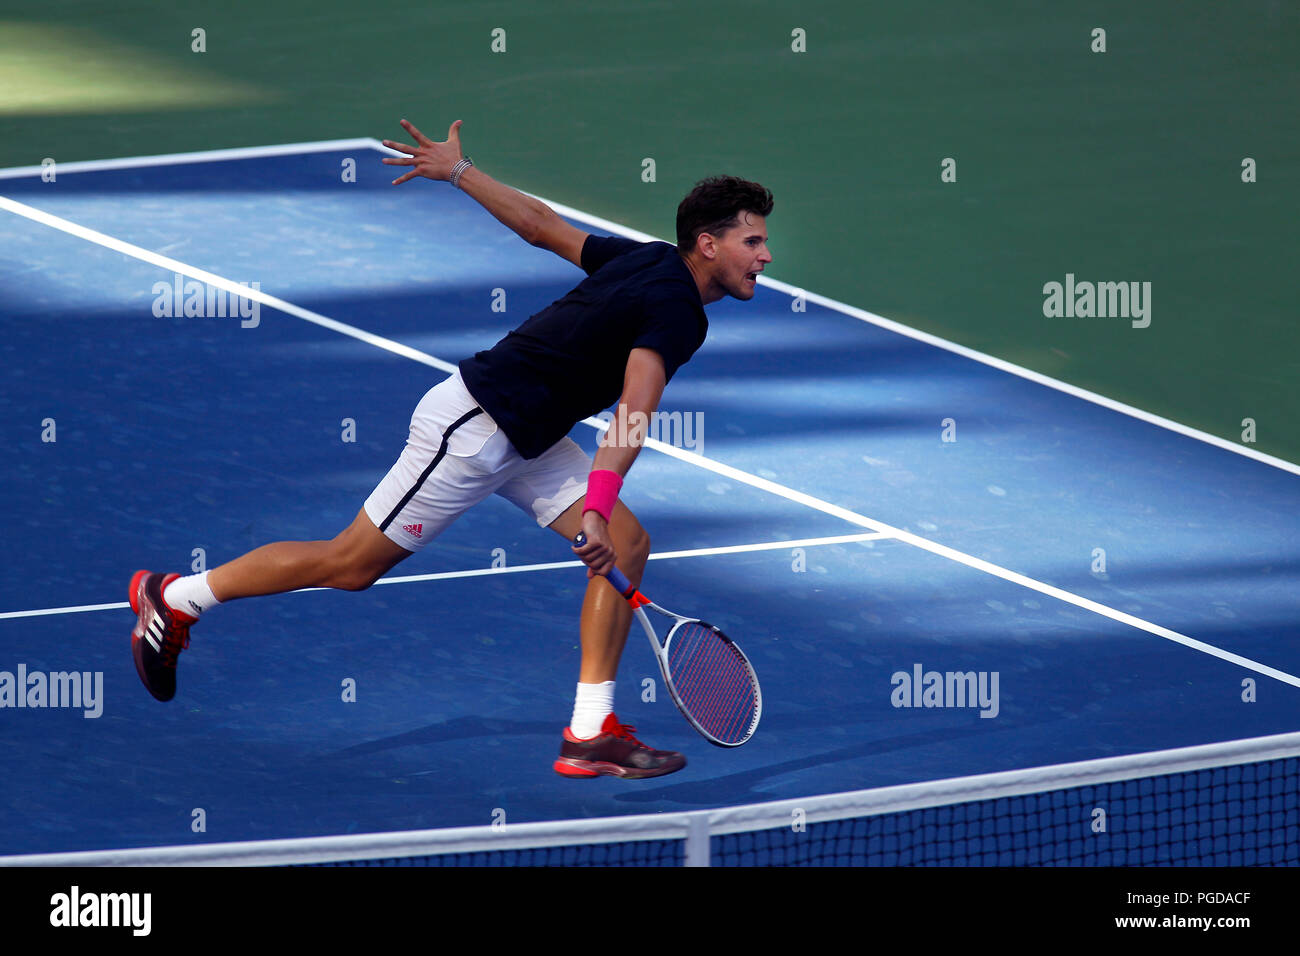 New York, N.Y, August 25, 2018 - US Open Tennis Practice:  Dominic Thiem of Austria practicing at the Billie Jean King National Tennis Center in Flushing Meadows, New York, as players prepared for the U.S. Open which begins on Monday. Credit: Adam Stoltman/Alamy Live News Stock Photo